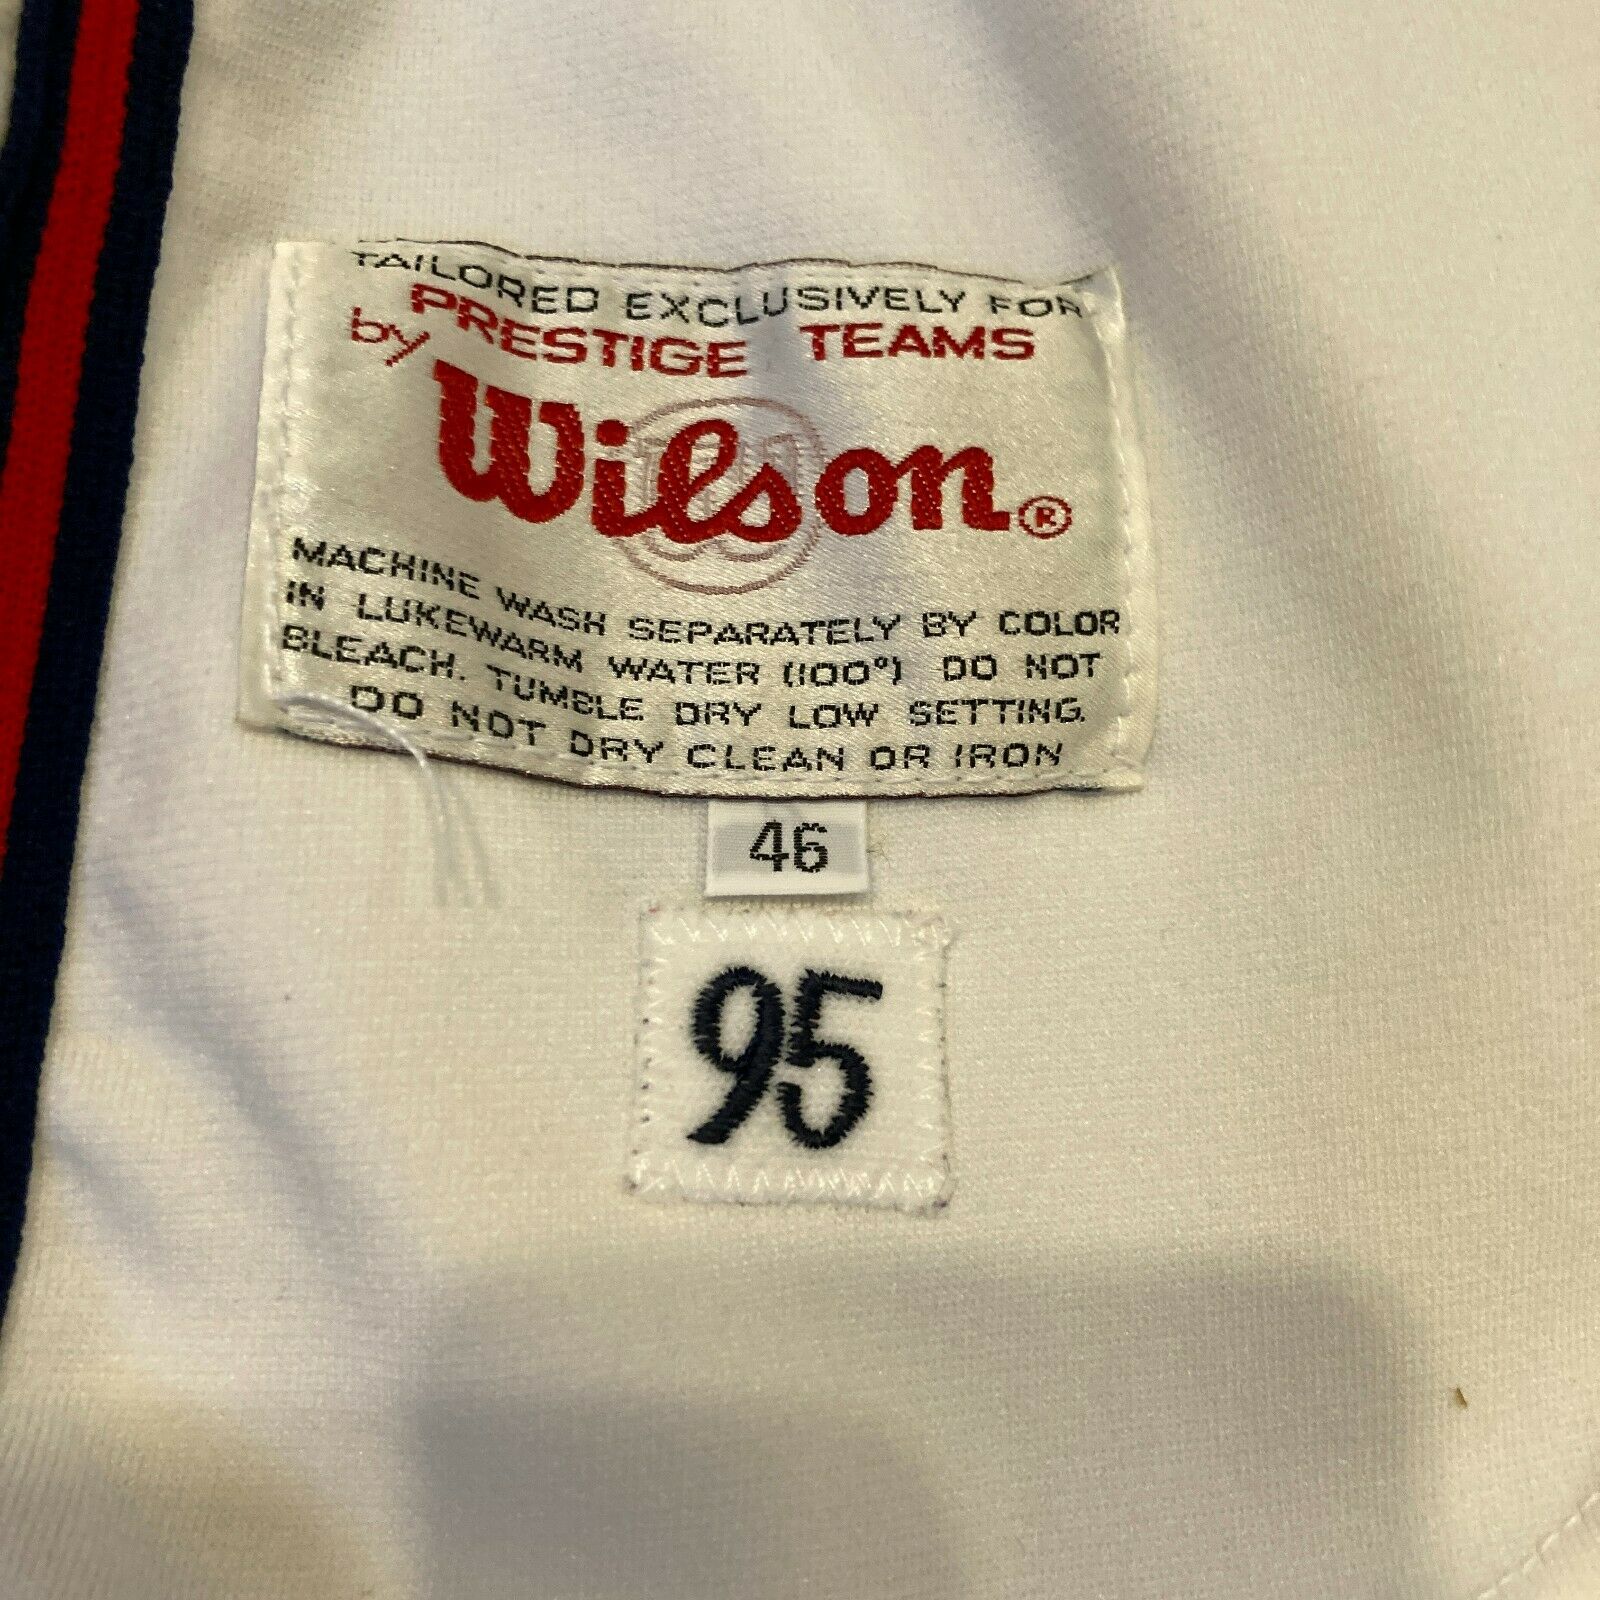 Marquis Grissom Atlanta Braves Game Used Worn Jersey 1995 Signed Excellent  Use